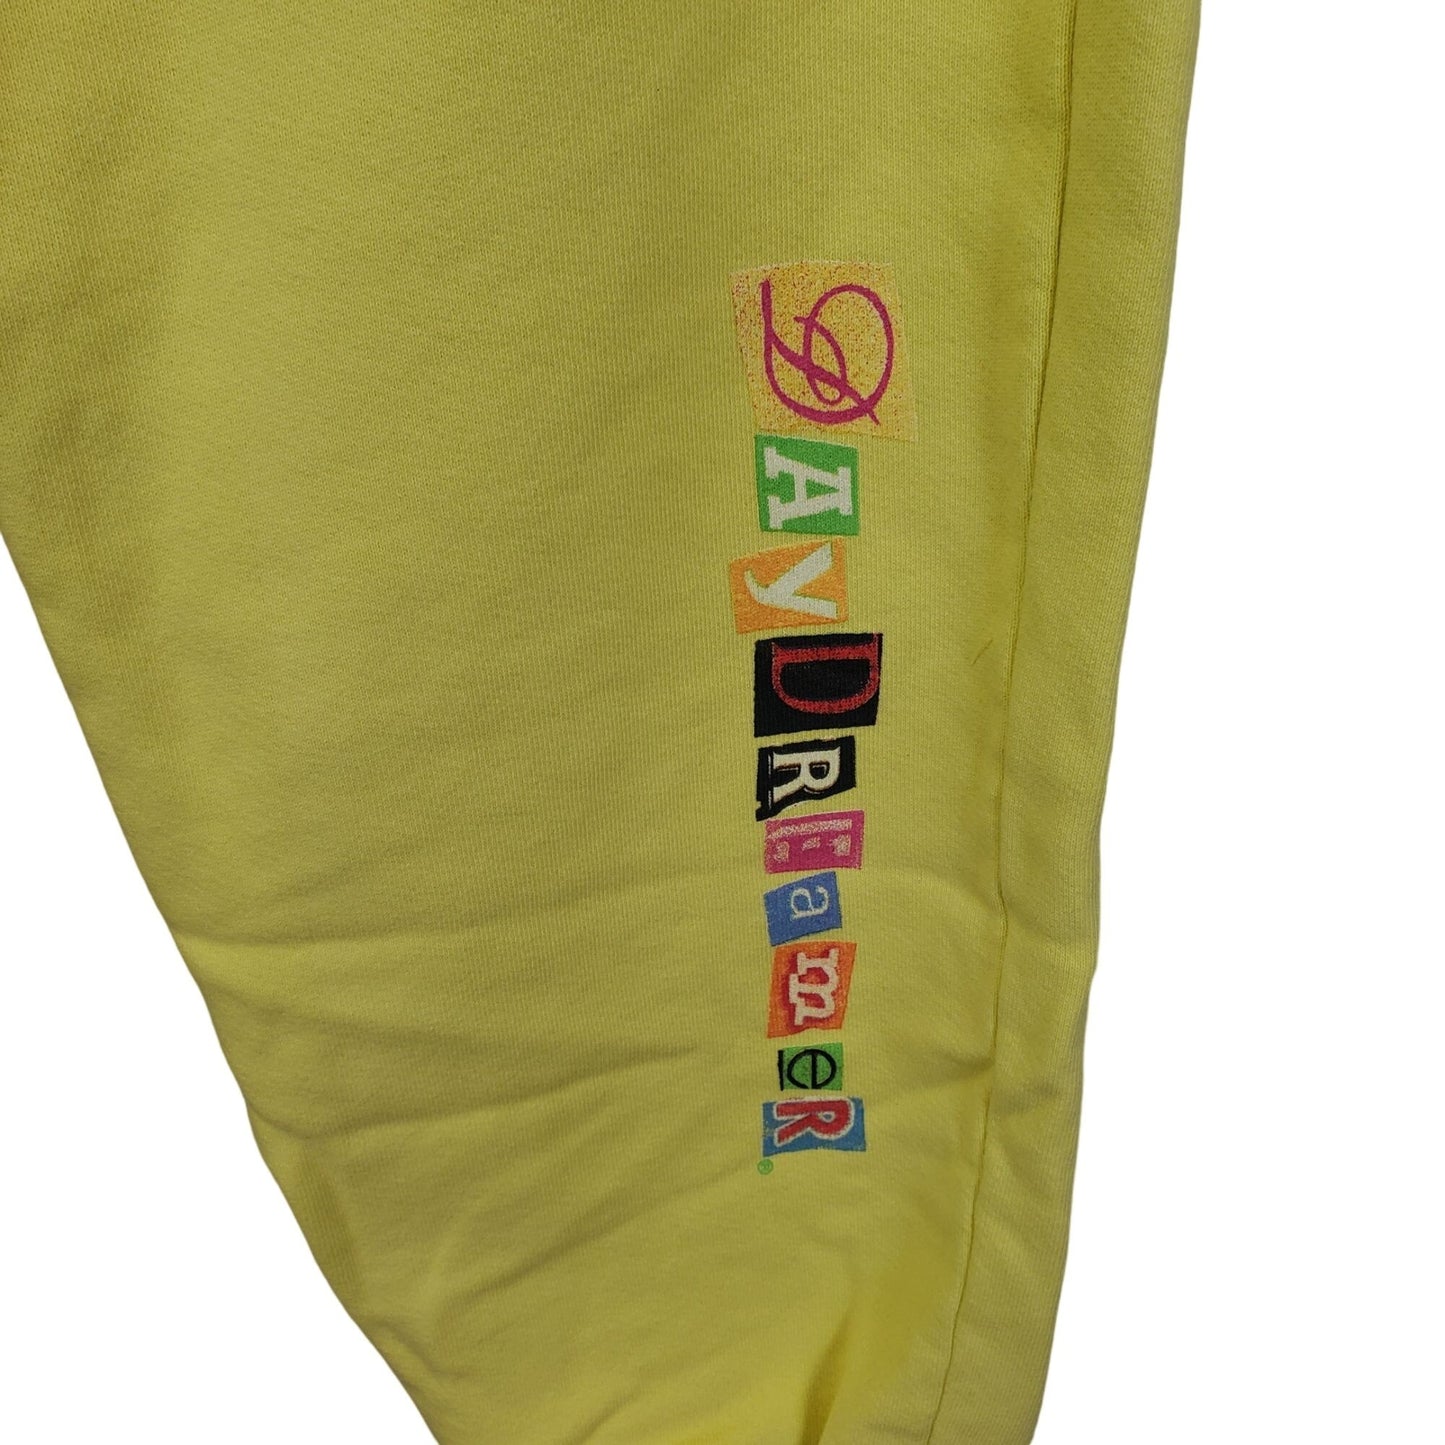 NWT Daydreamer Signature Jogger Sweatpants in Citron Size XS